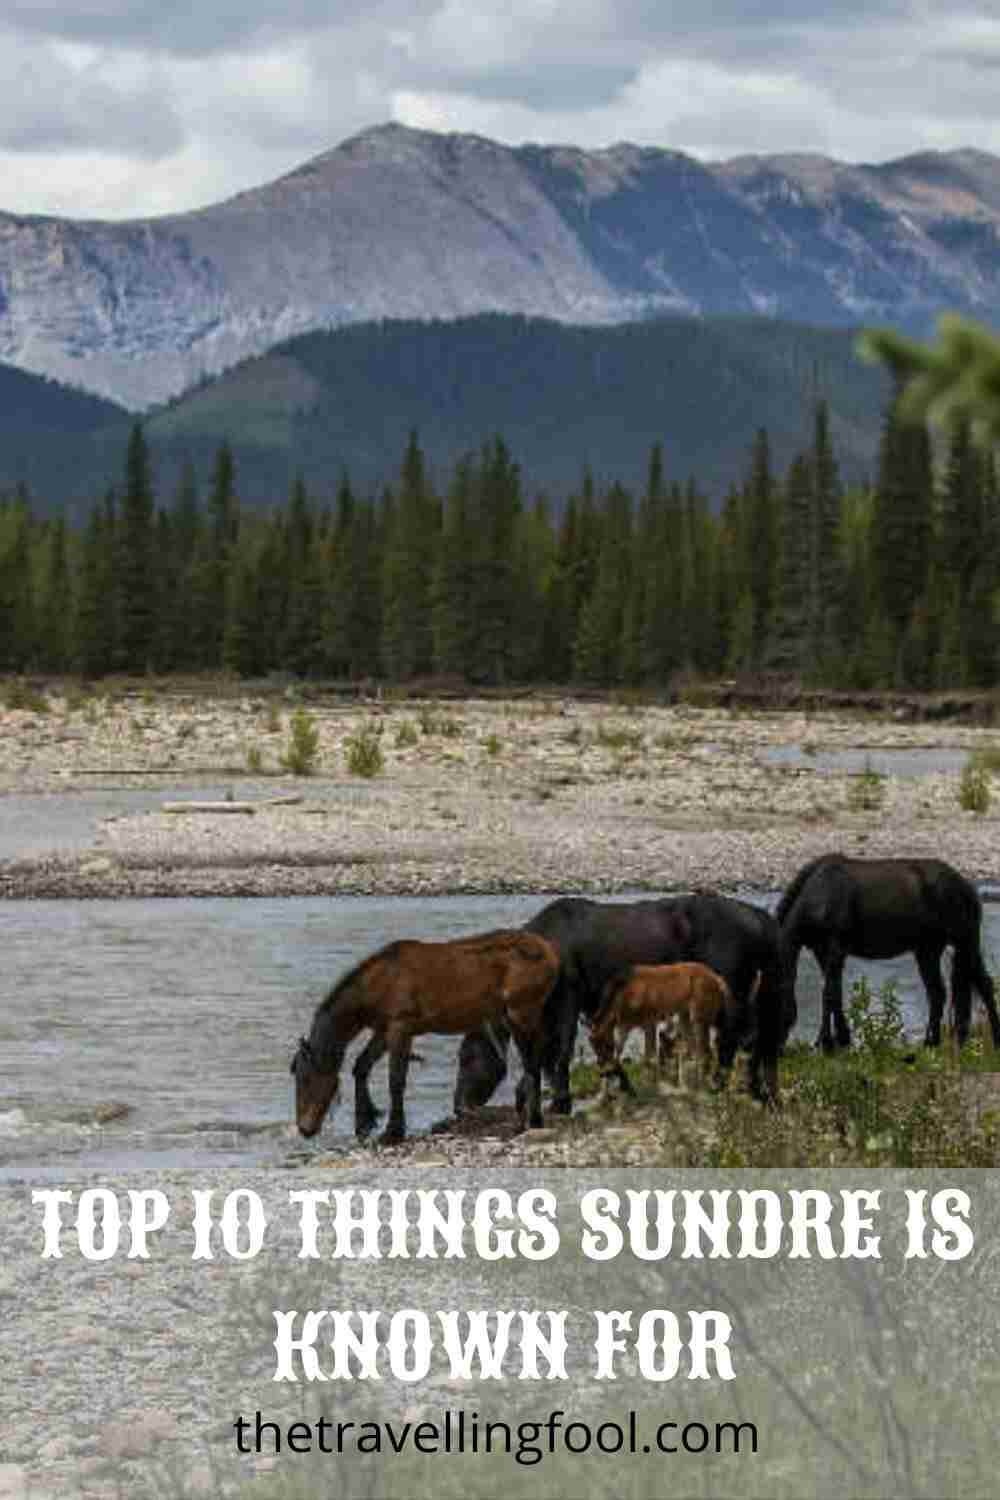 Top Ten Things Sundre is Known For